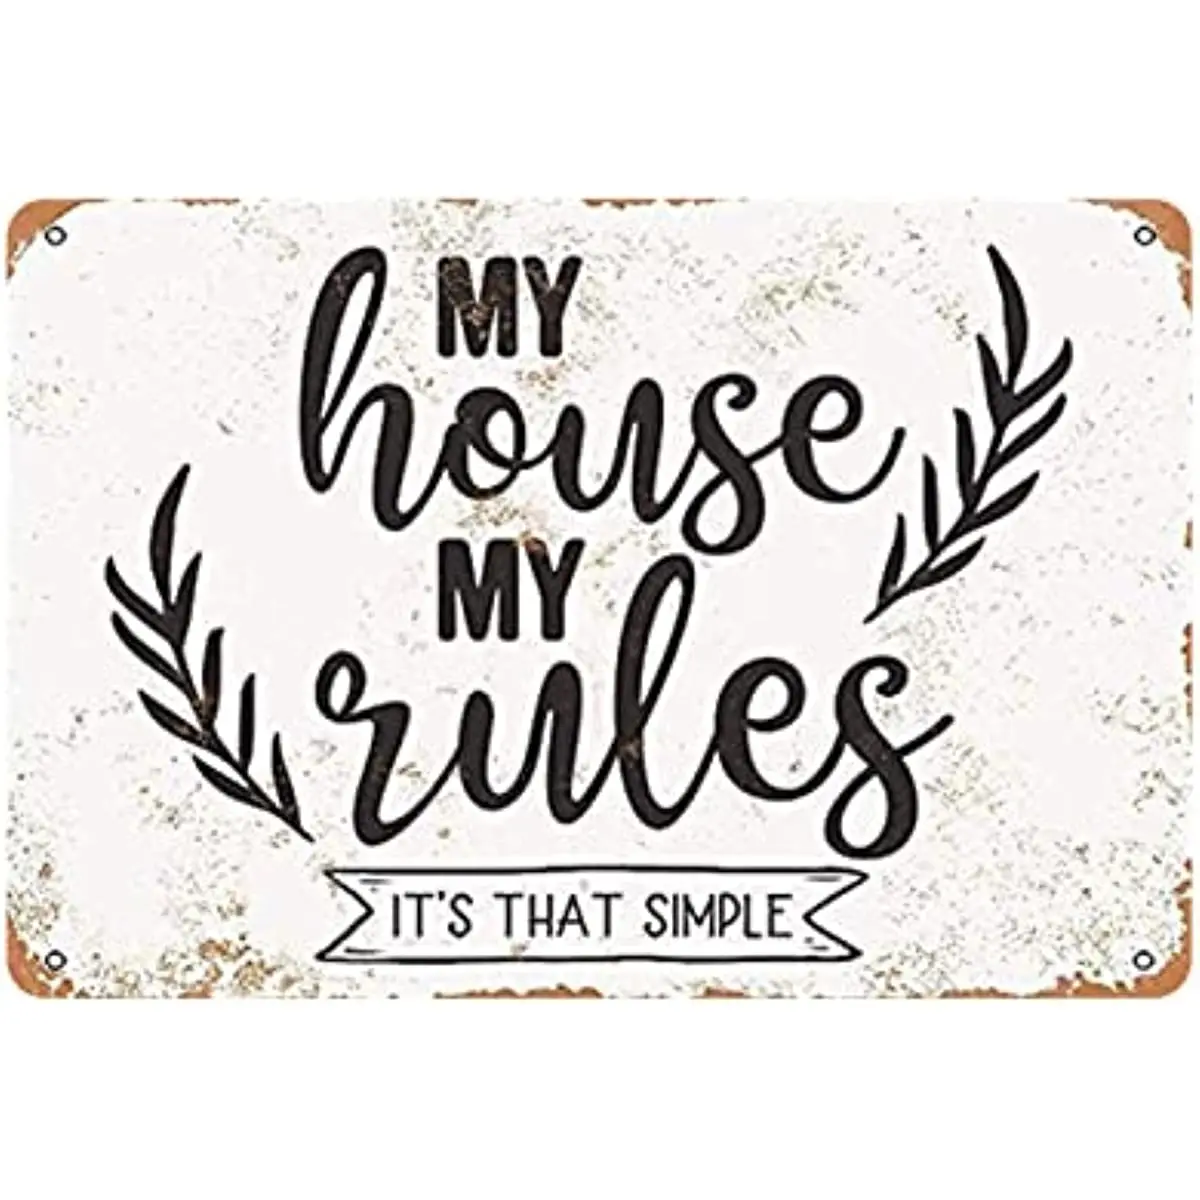 

New Metal Tin Sign Vintage Great My House My Rules & for Home, Living Room, Garden, Bedroom, Office, Hotel